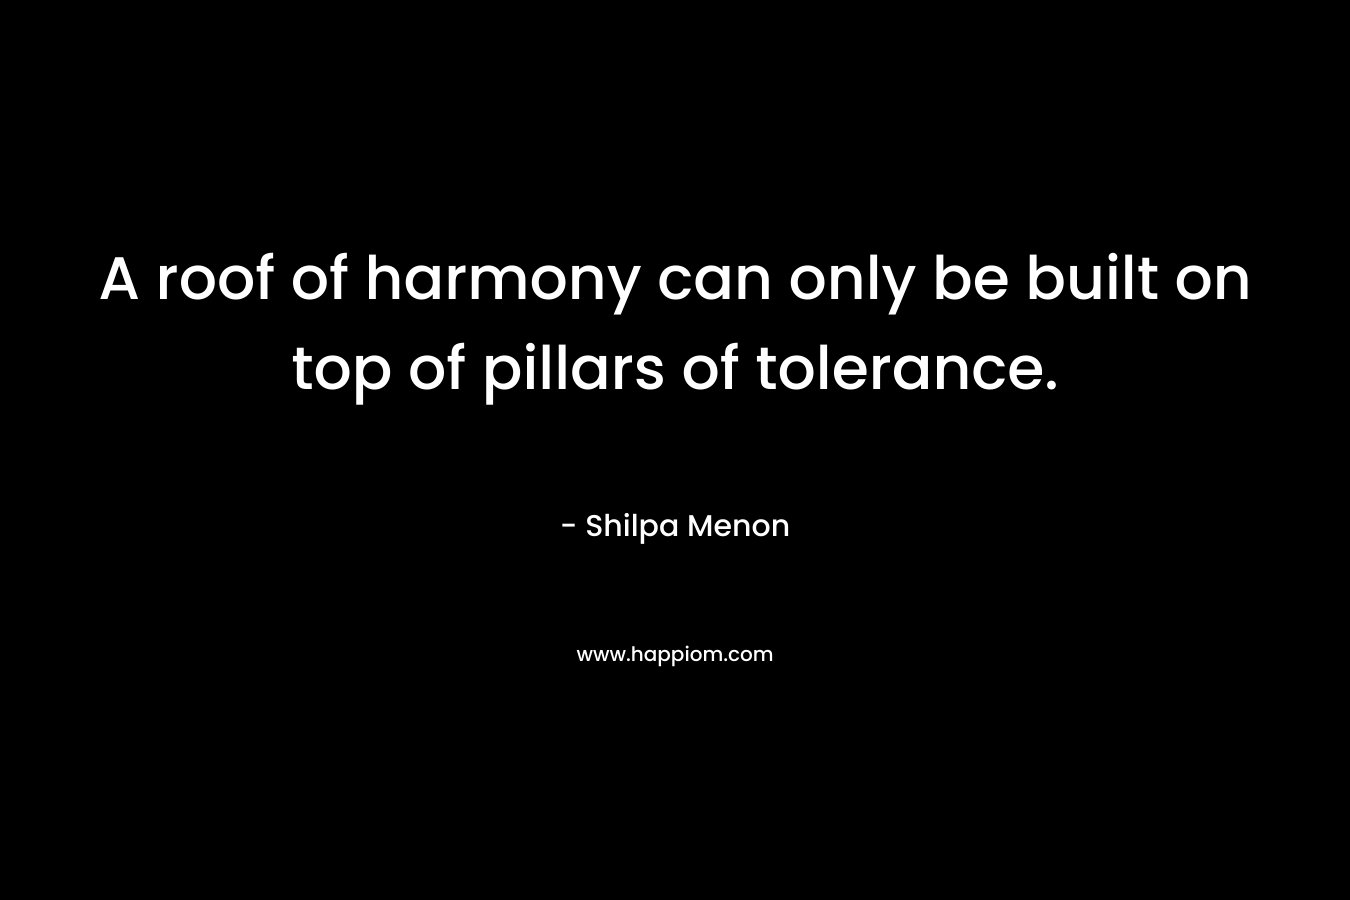 A roof of harmony can only be built on top of pillars of tolerance.